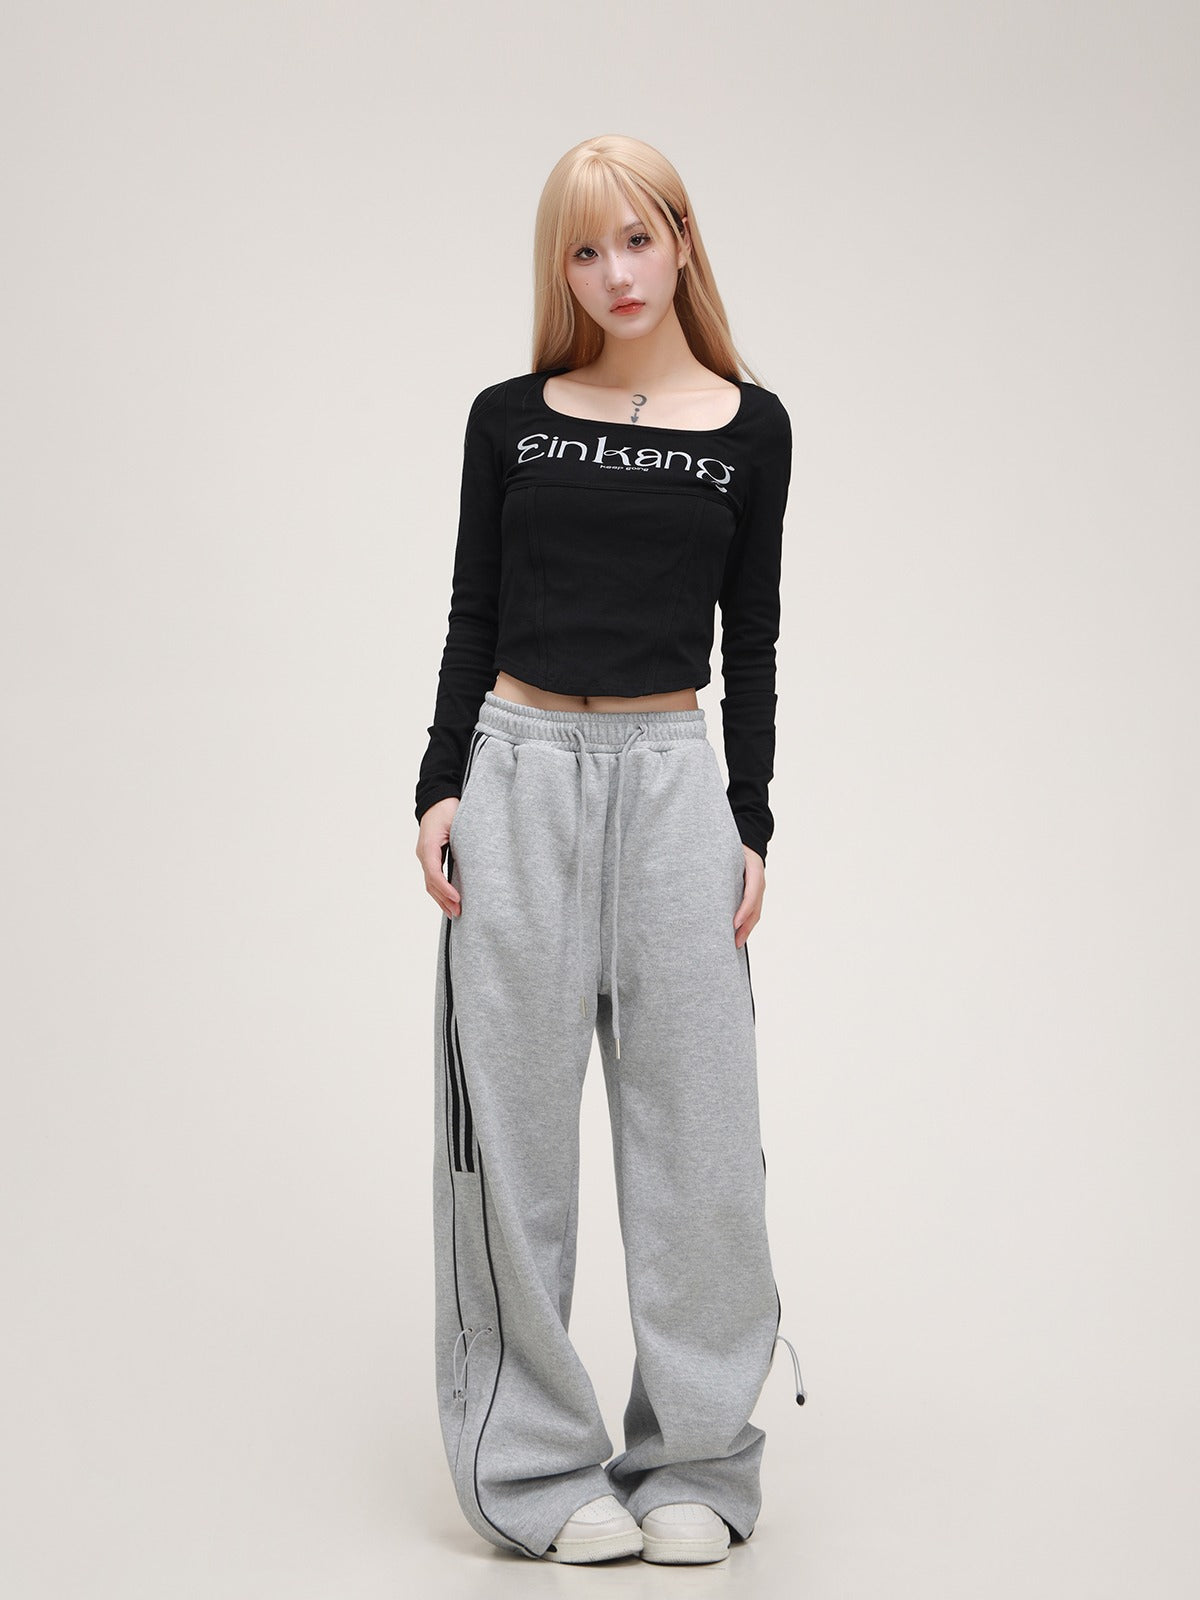 American straight loose casual pants